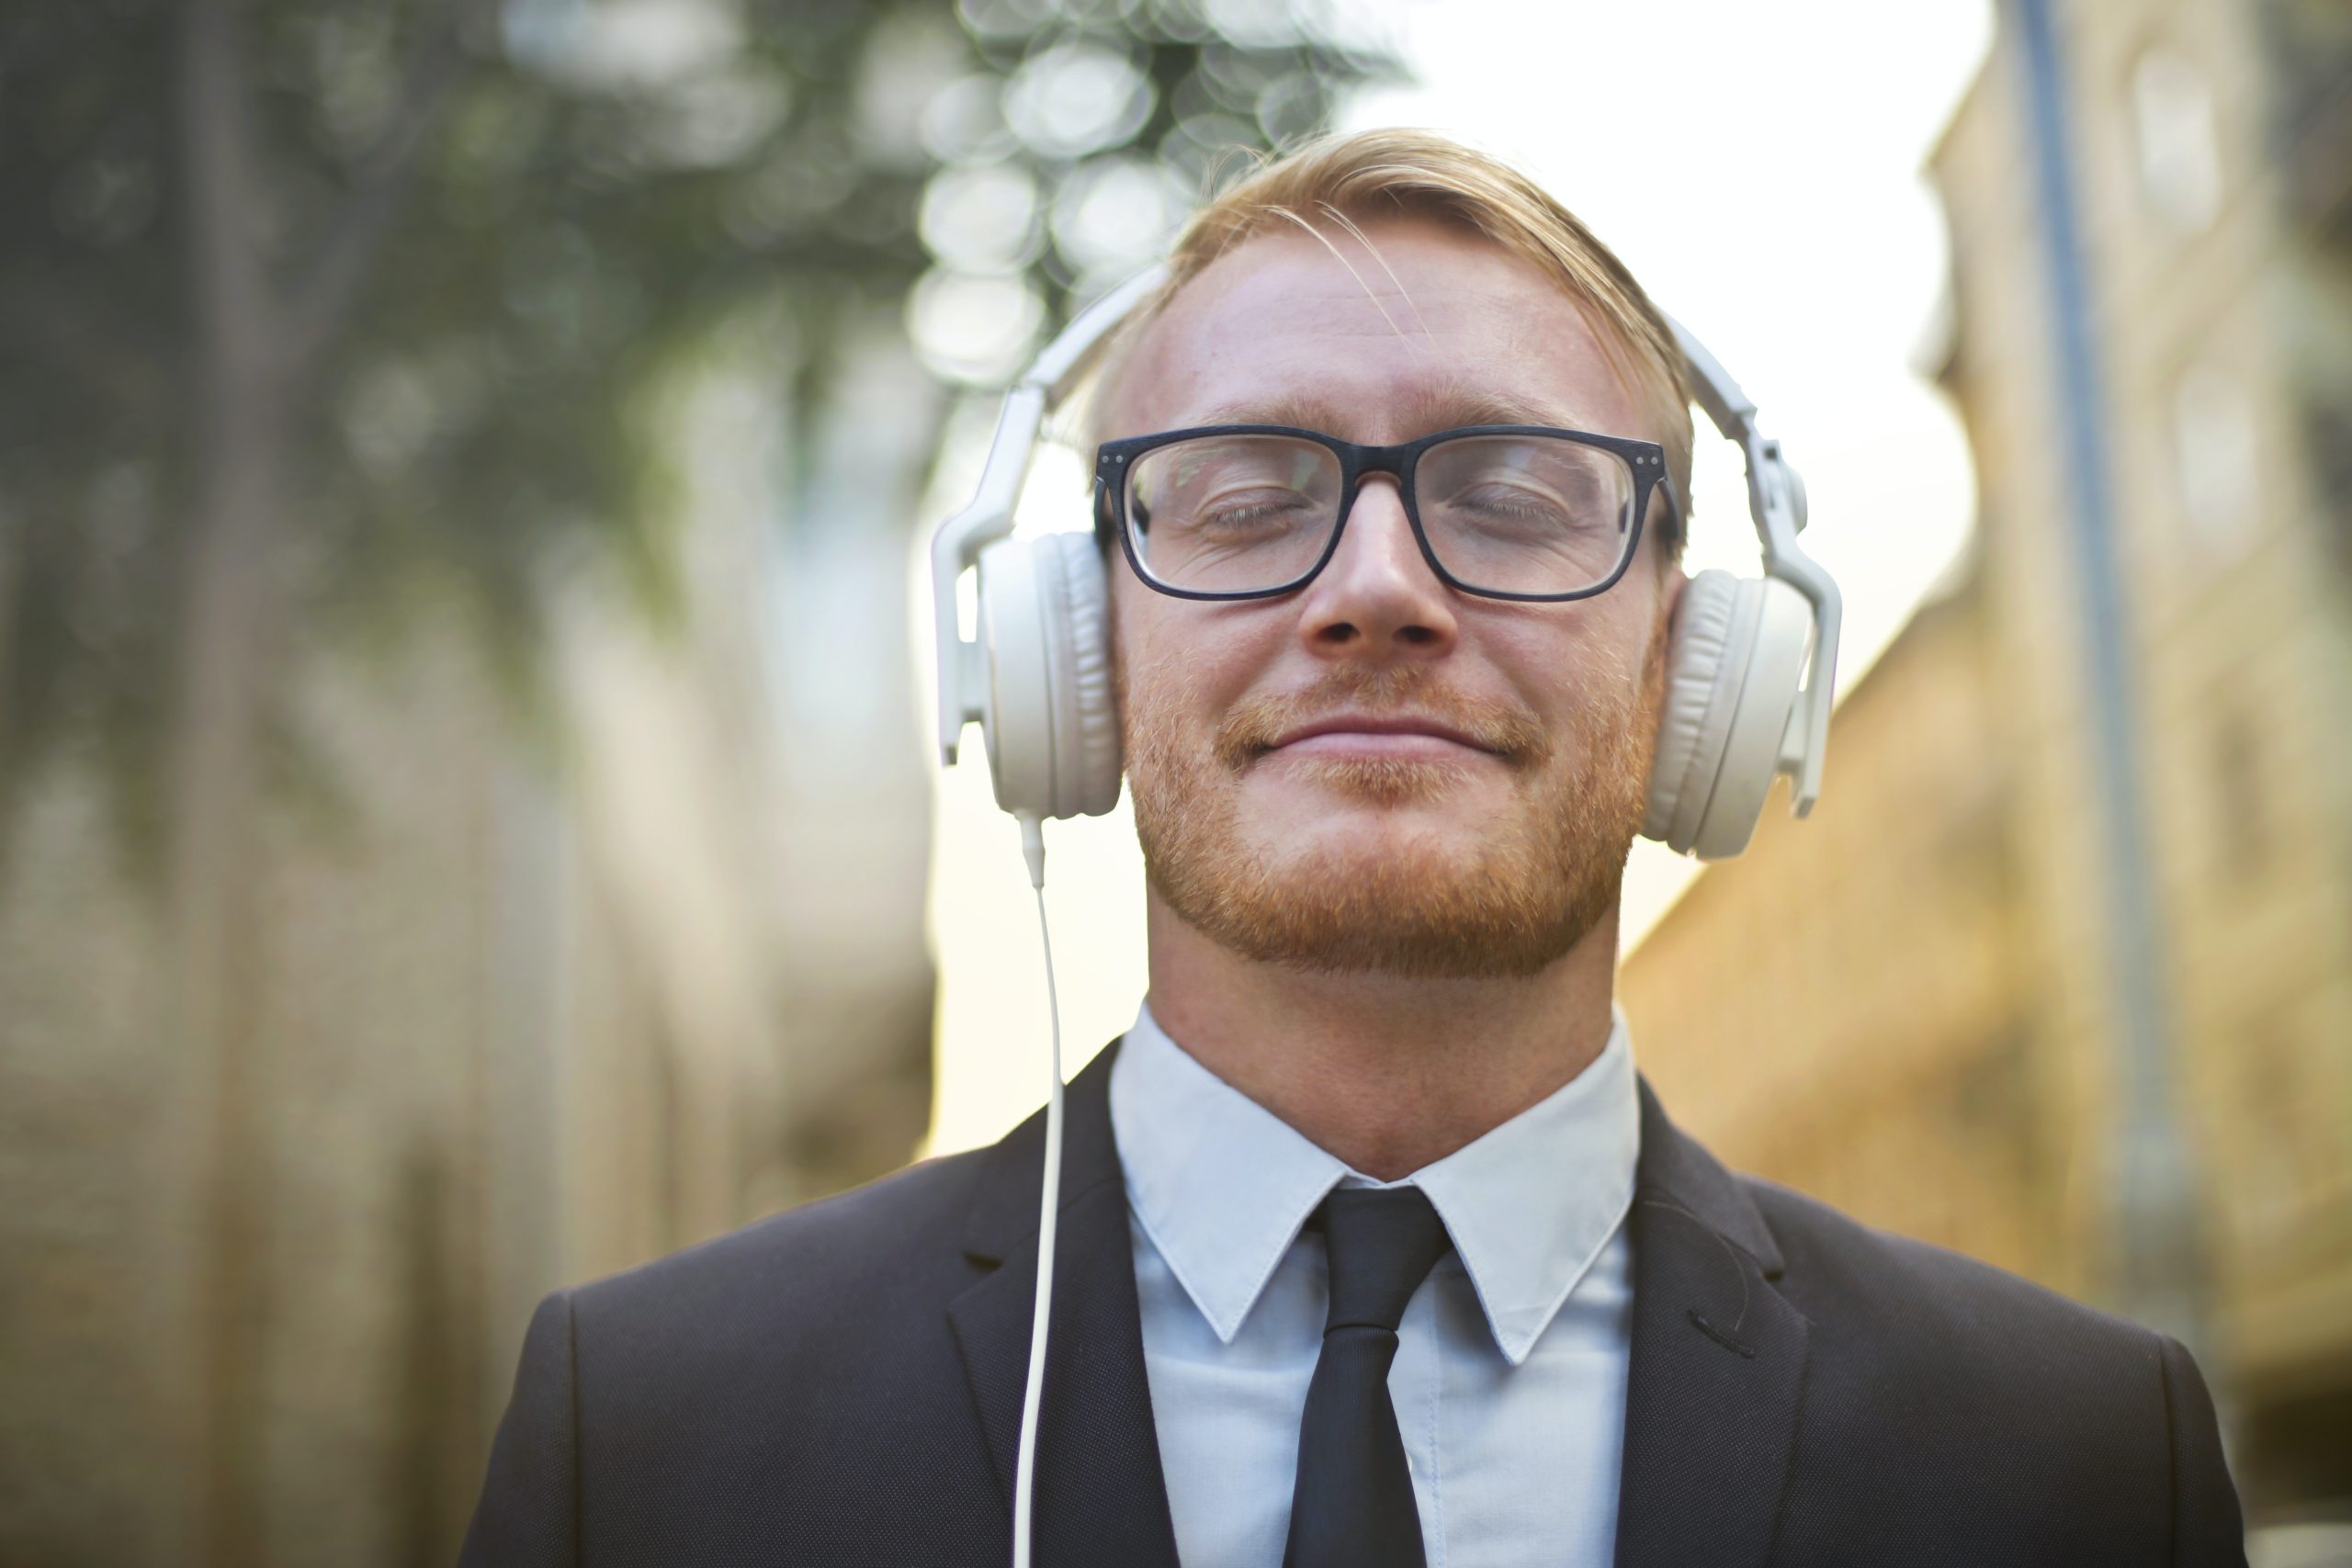 Raising Your Law Firm's Brand With YouTube Audio Ads, and Other Must-Reads